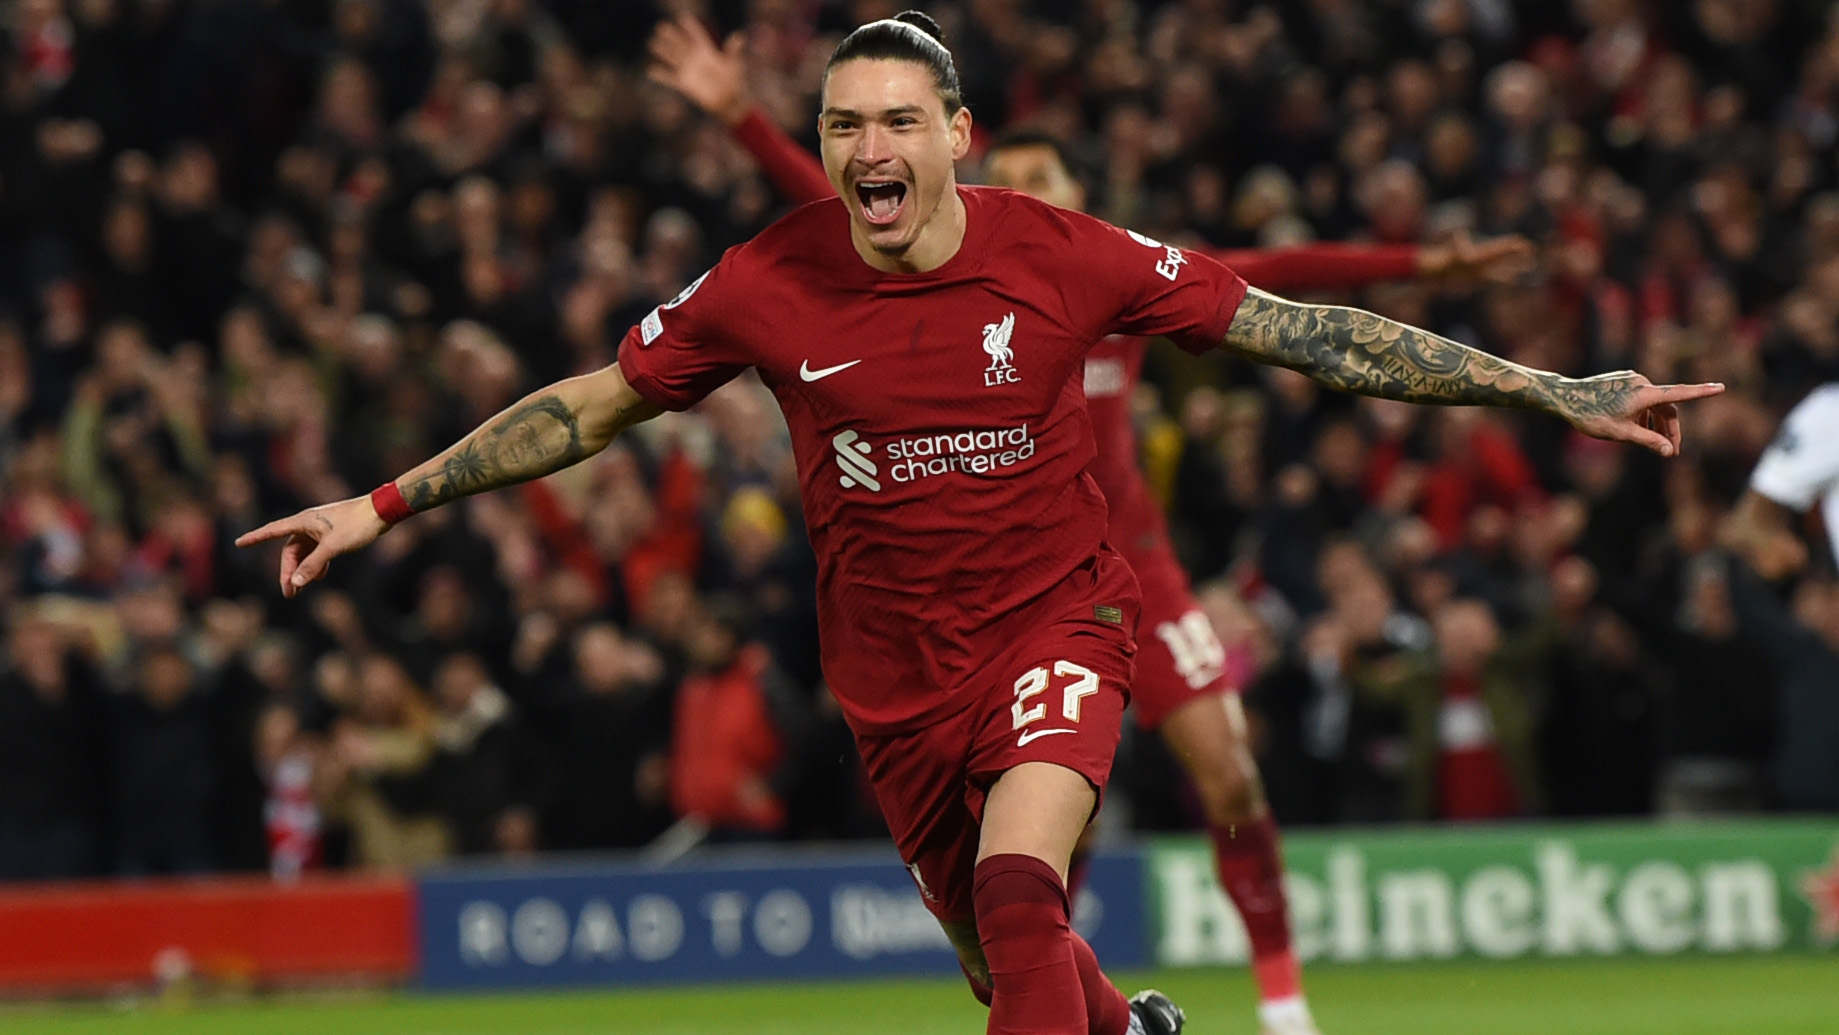 WATCH: Darwin Nunez scores incredible flicked goal vs Real Madrid and electrifies Anfield! | Goal.com